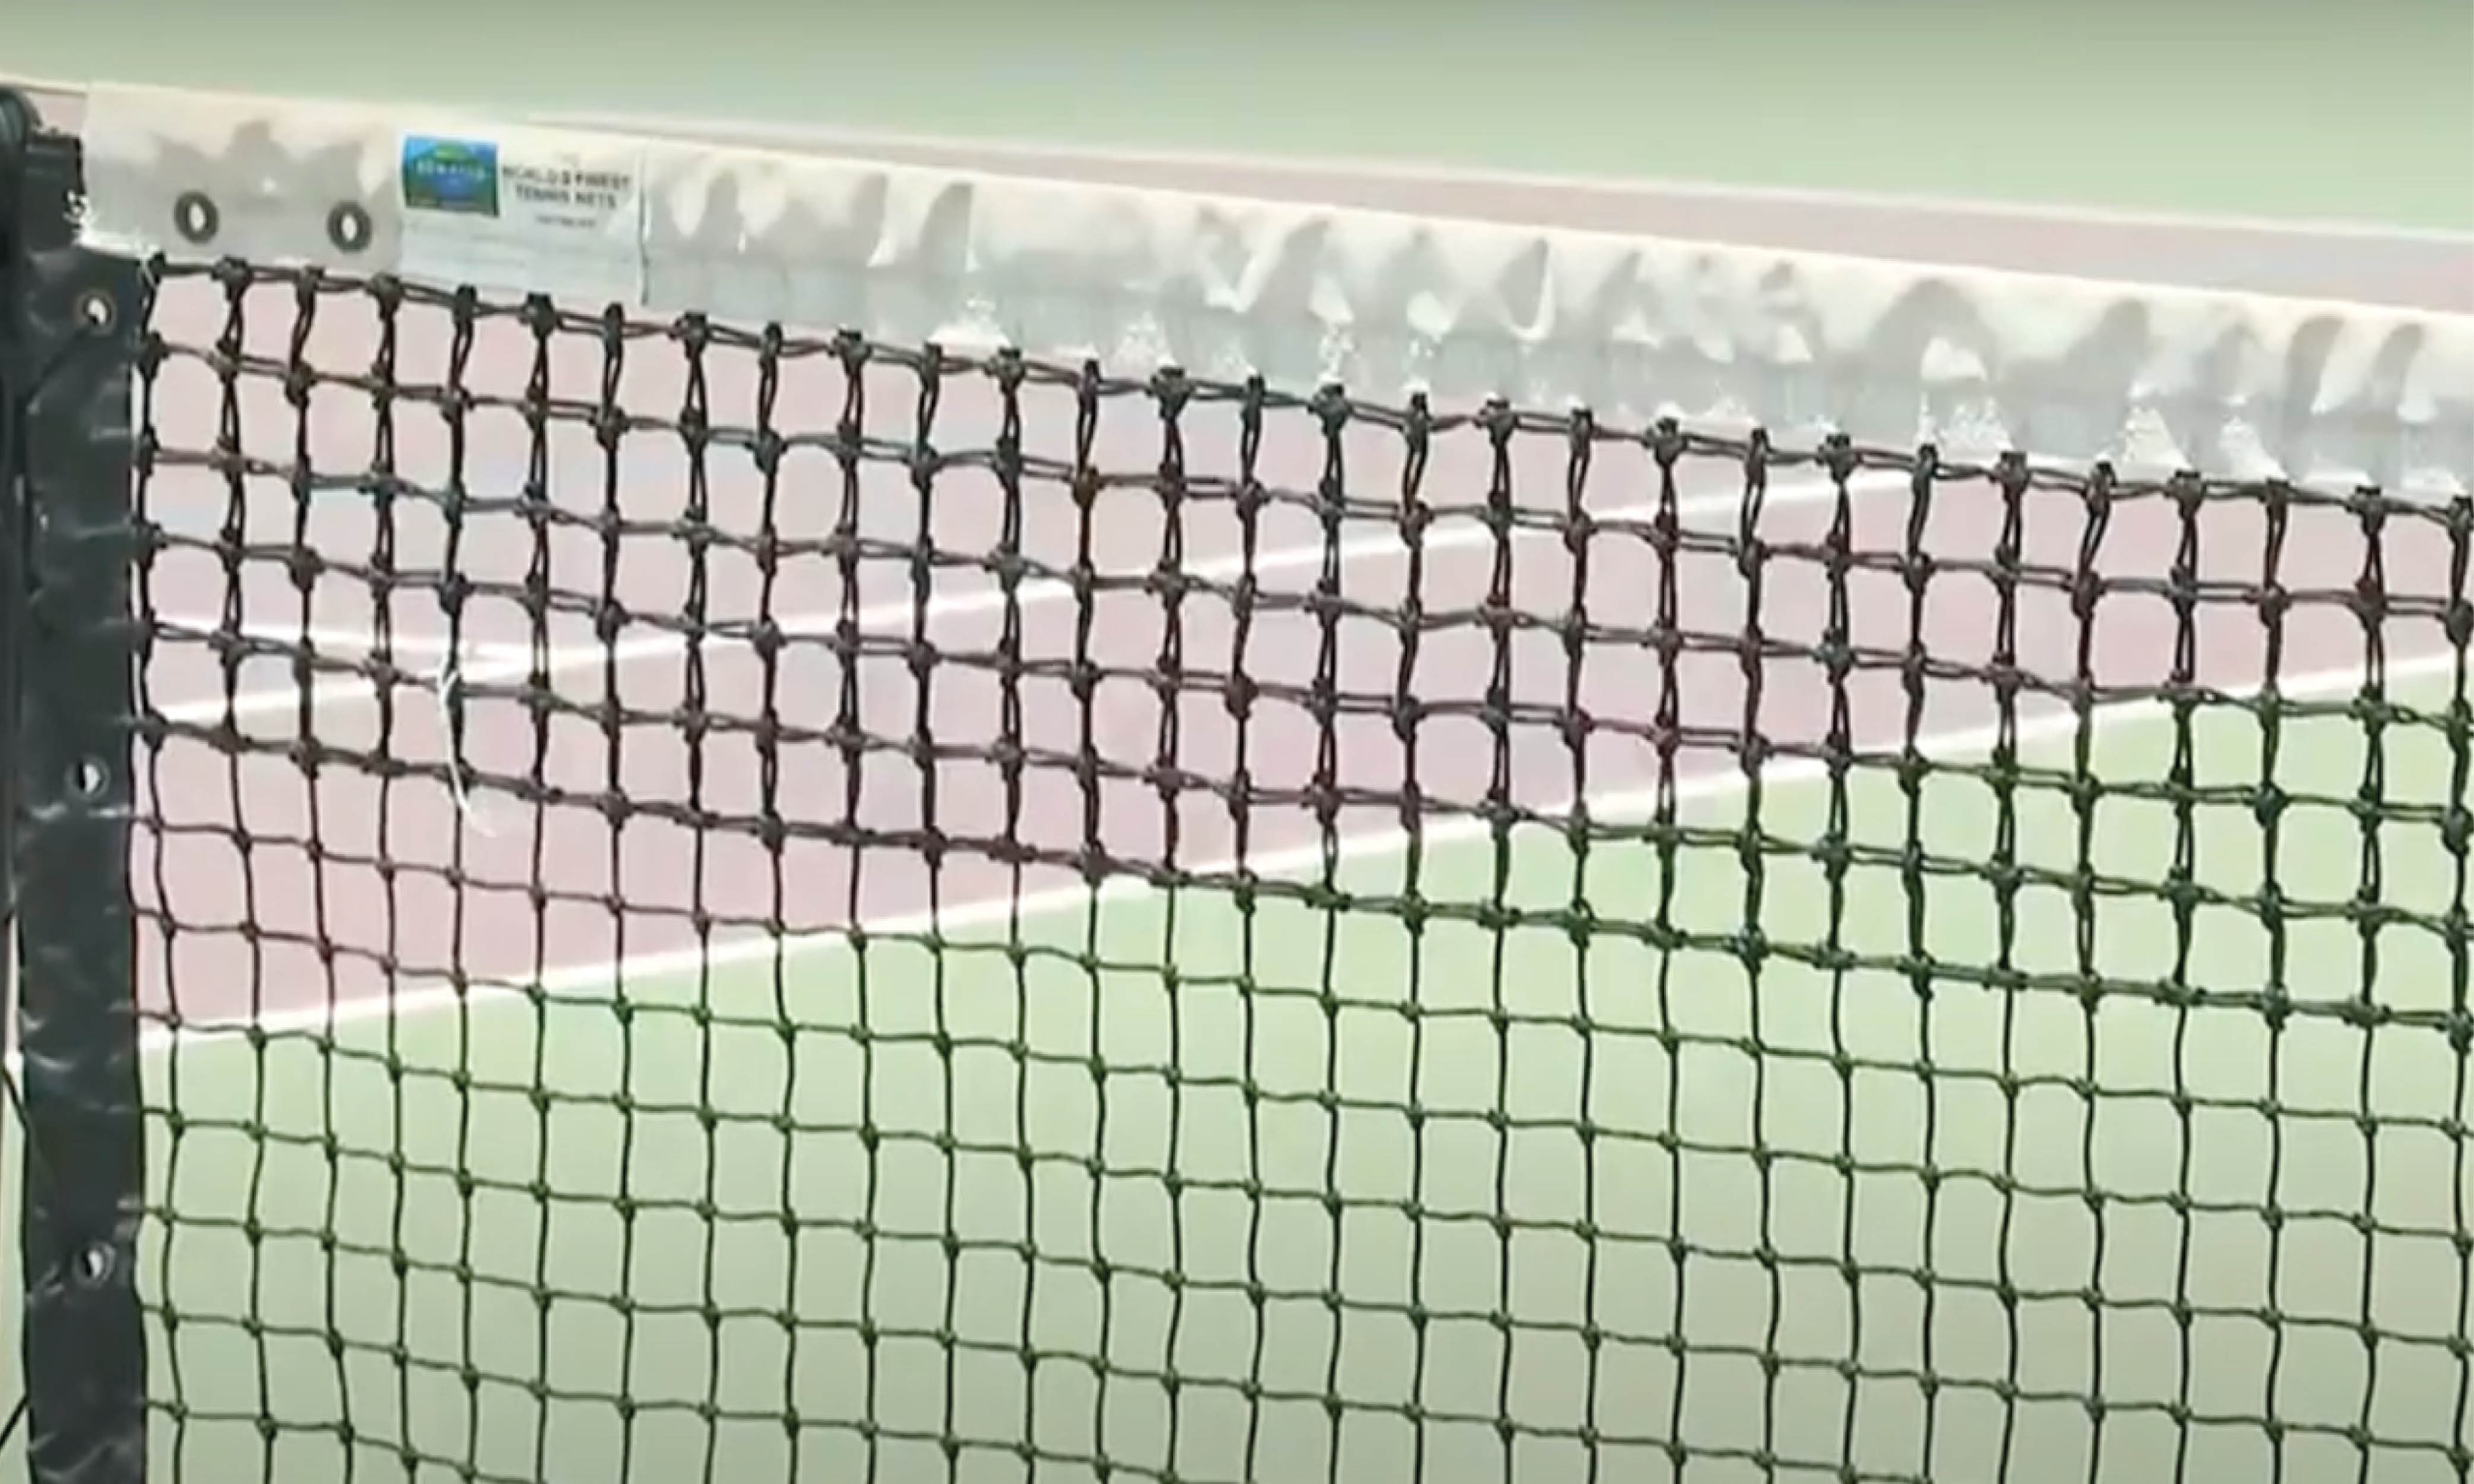 A tennis net with a white net stretched across it, providing a barrier for the players during a match.